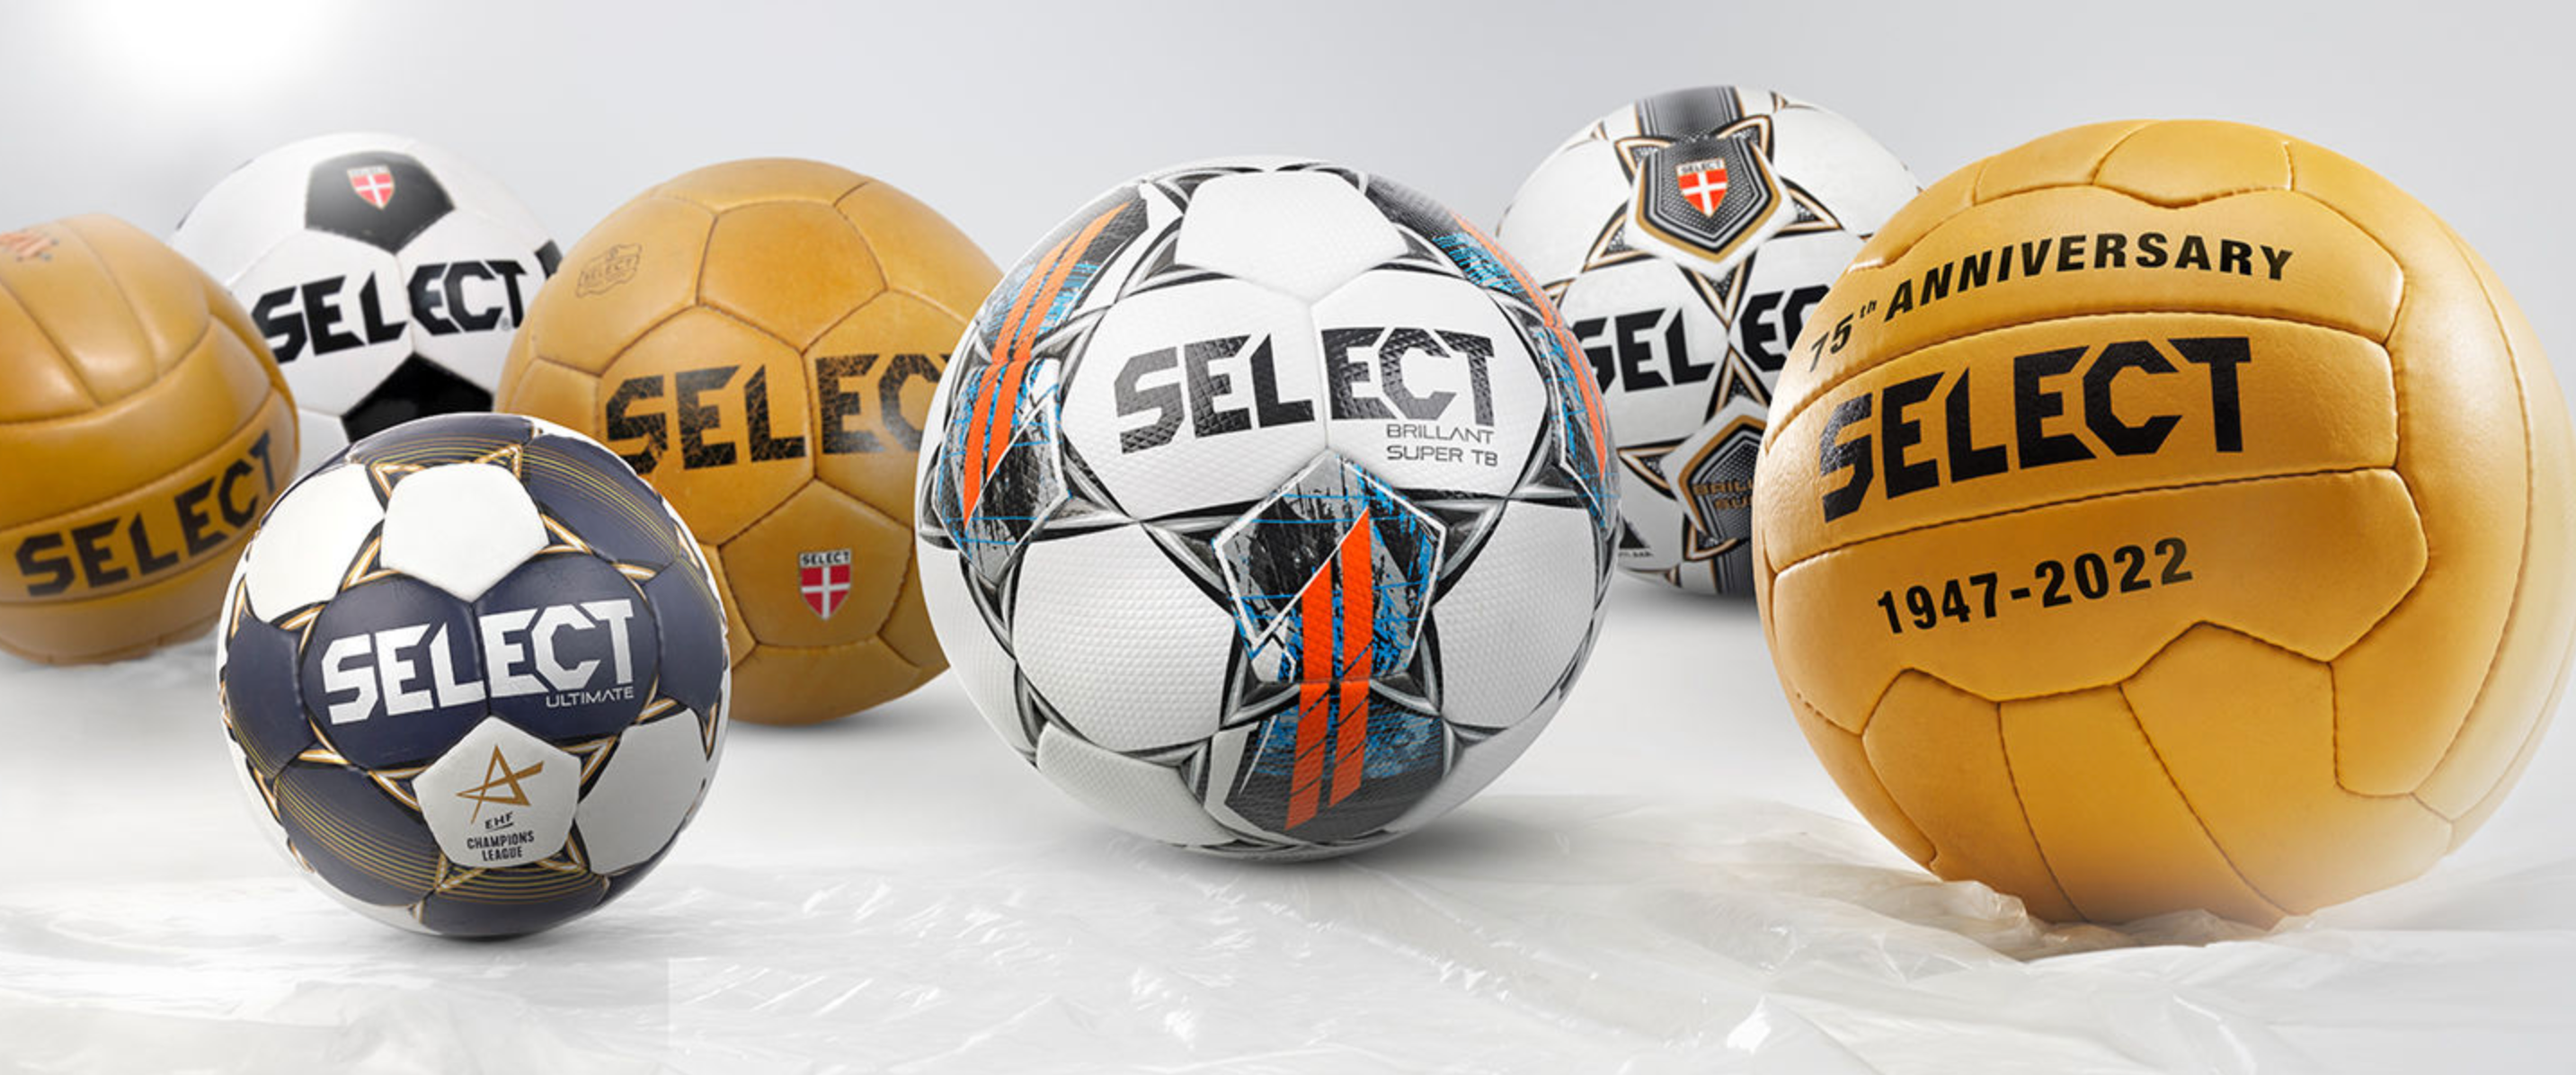 Everything For Your Club - specialist Your ball